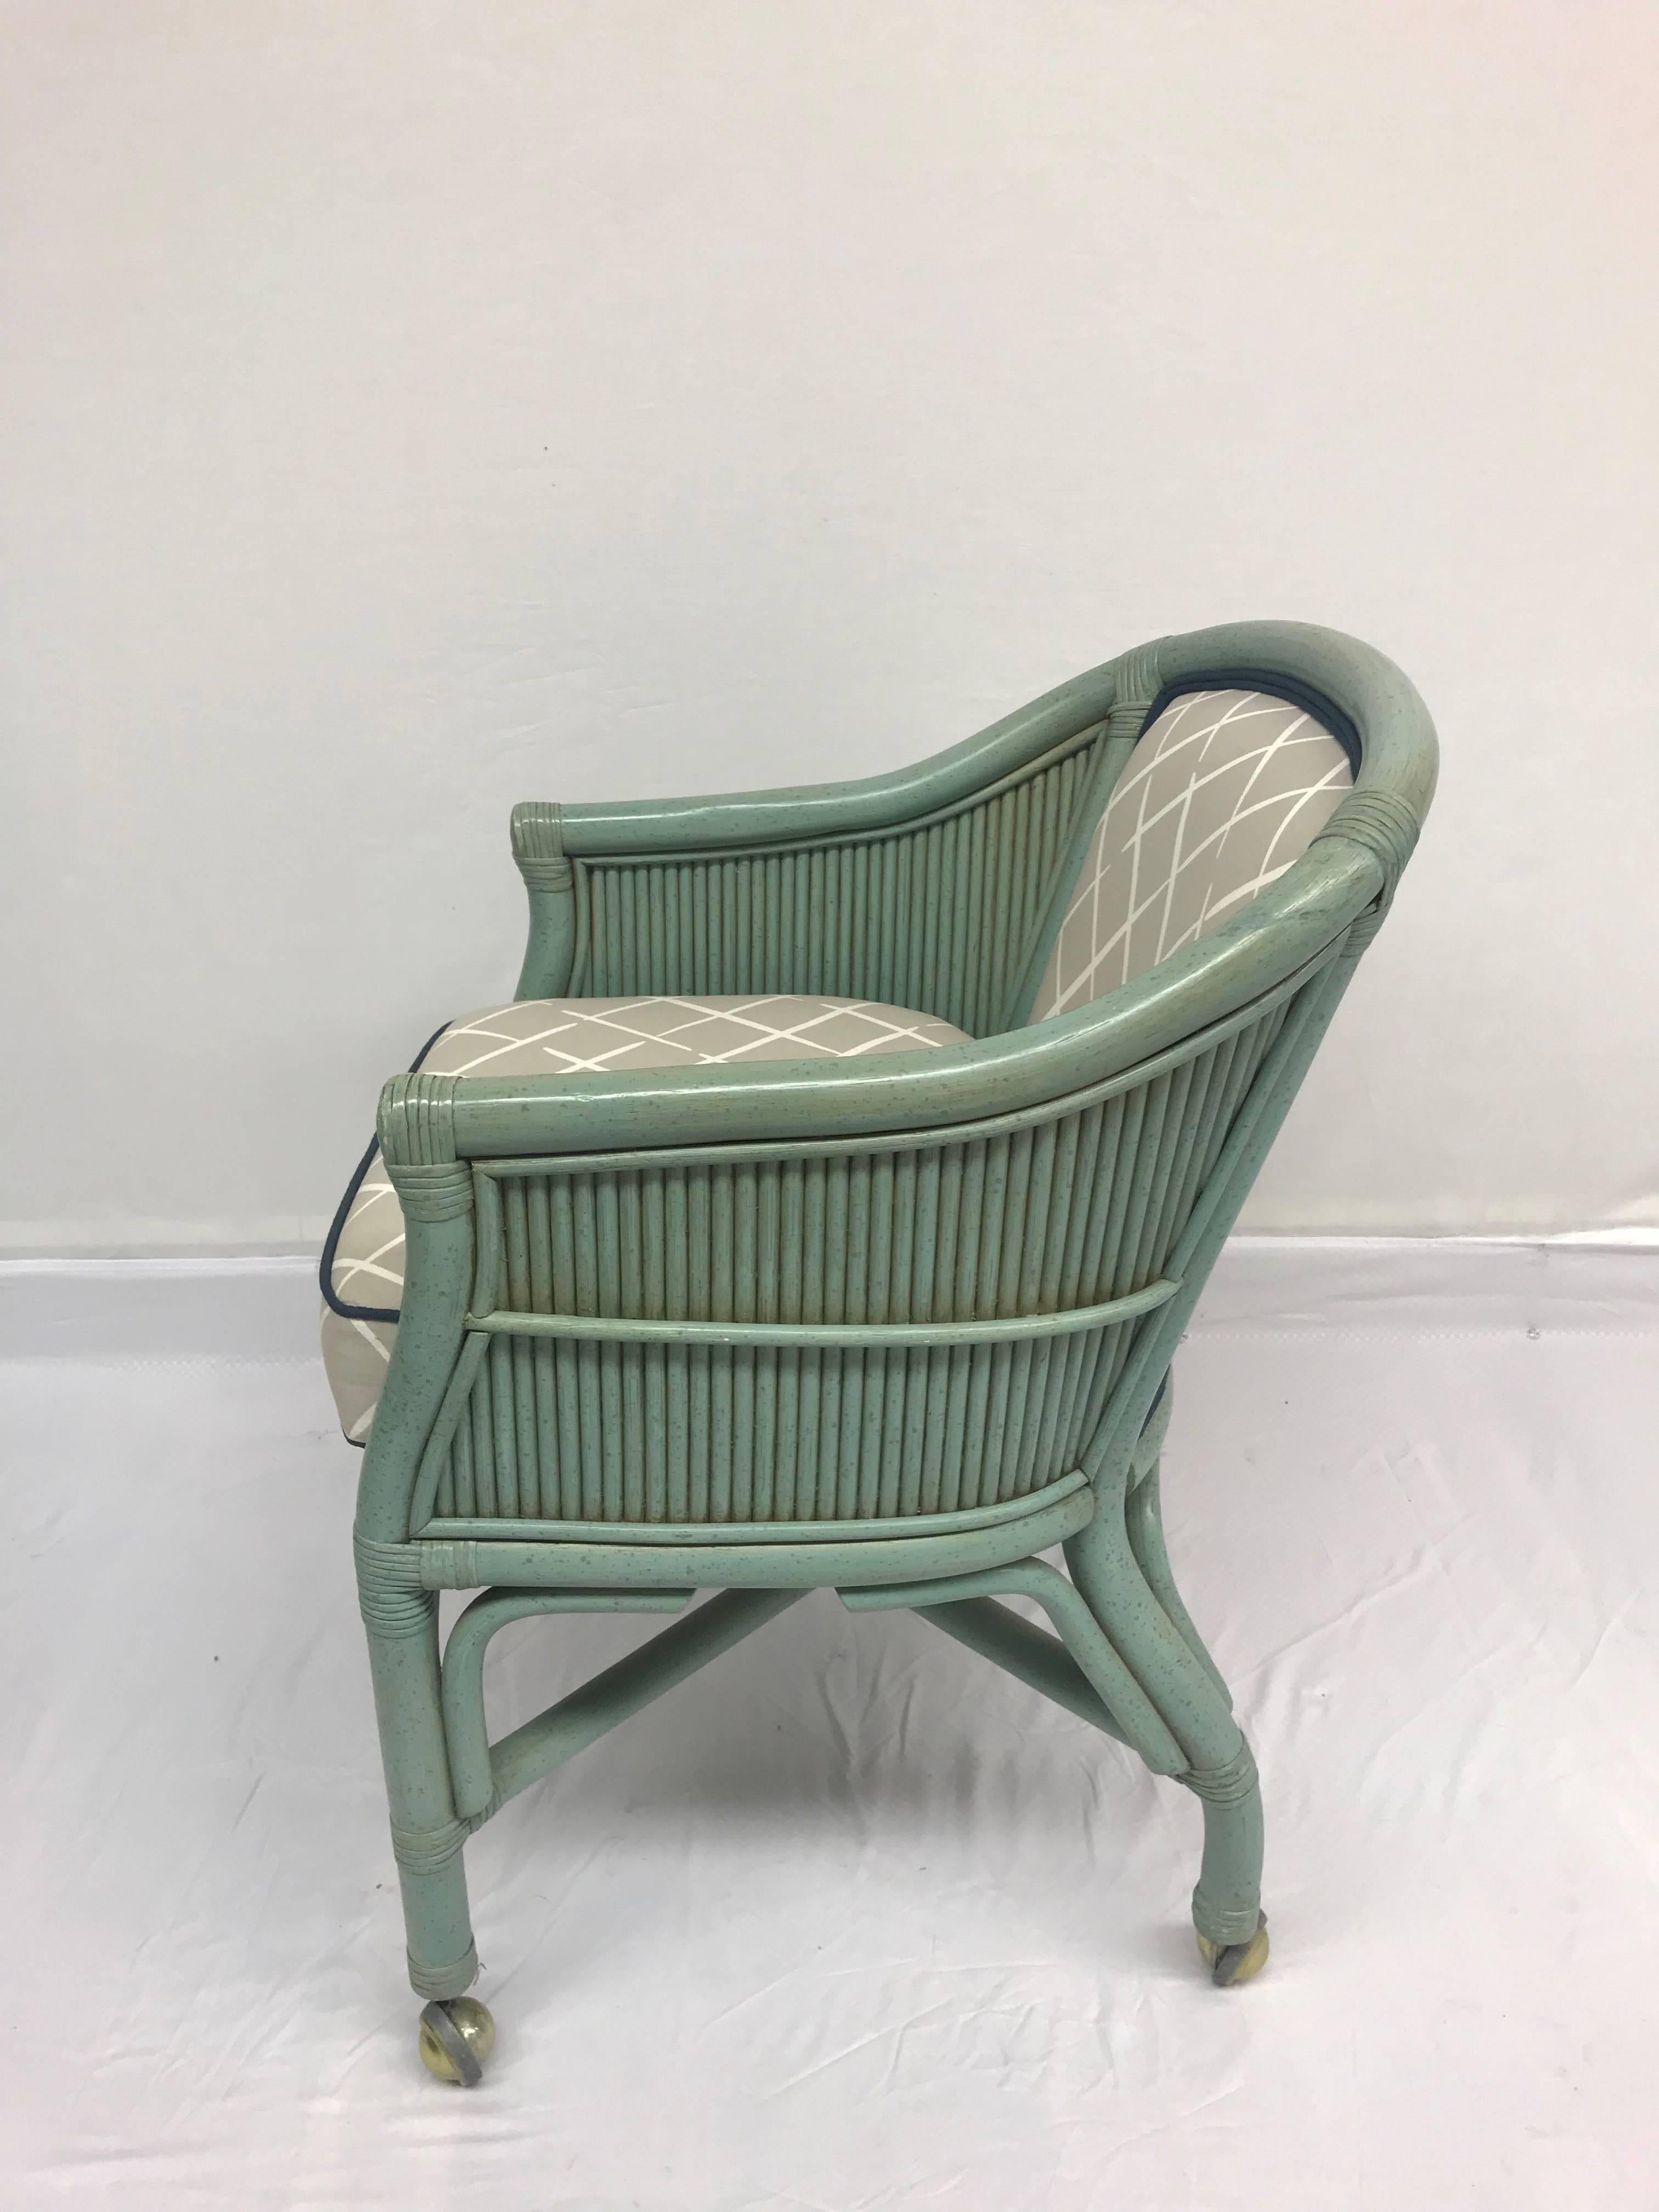 Other Vintage Seafoam Blue Rattan Chairs With Casters - Set of 4 For Sale